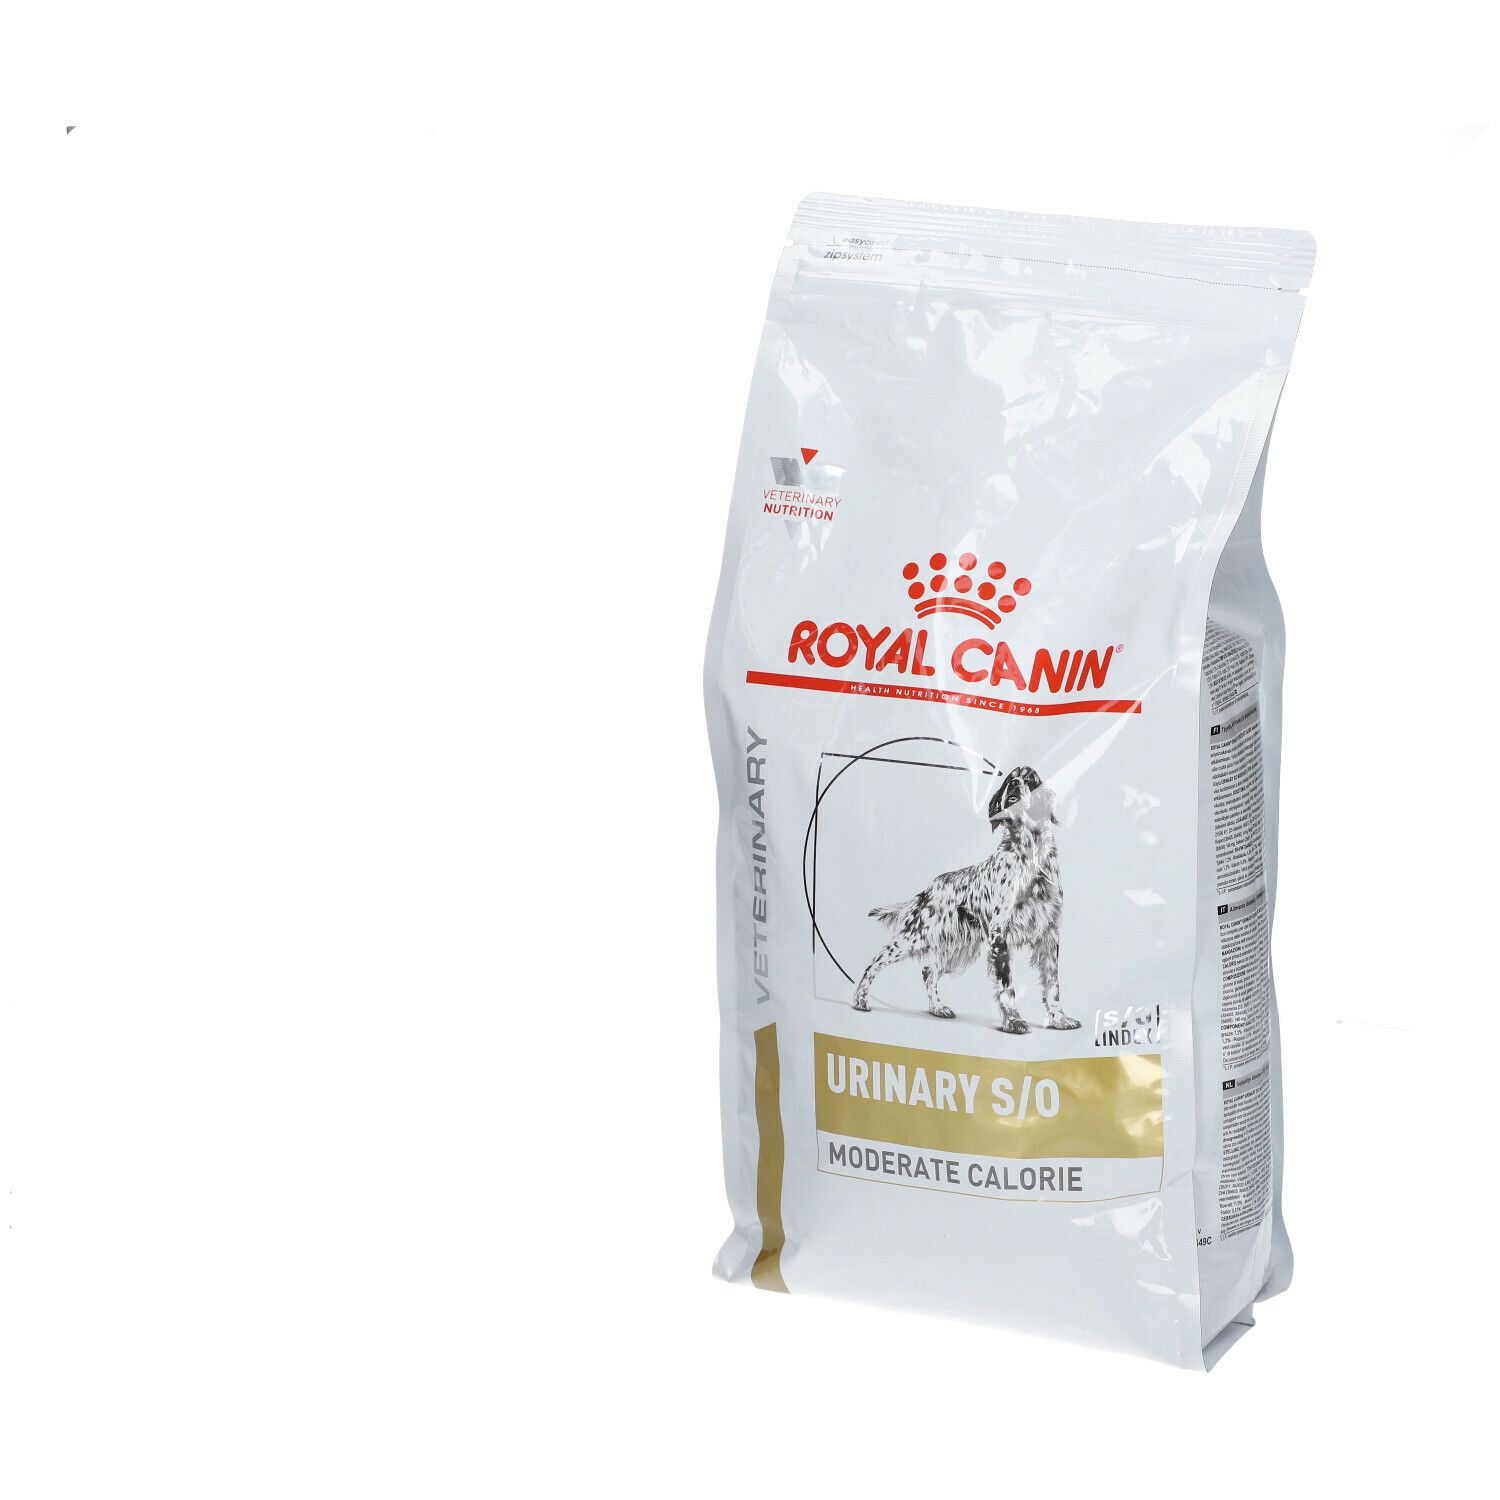 Royal Canin® Veterinary Canine Urinary S/O Moderate Calorie